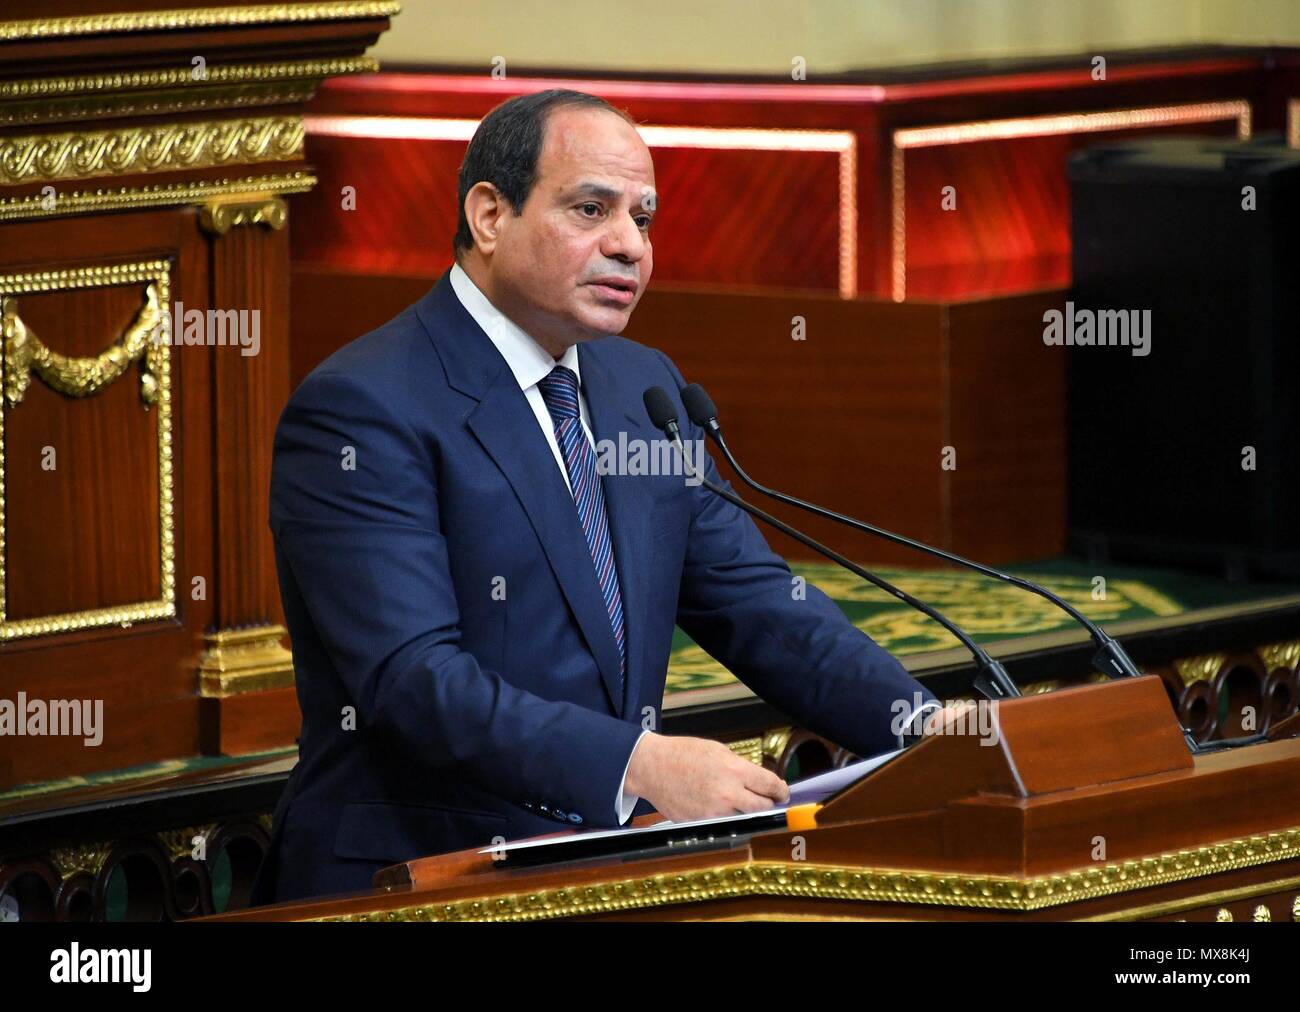 Cairo, Egypt - 2 June 2018 - Egyptian President Abdel Fattah El-Sisi addresses the Egyptian Parliament at the beginning of his second 4-year term. (pool photo) Stock Photo